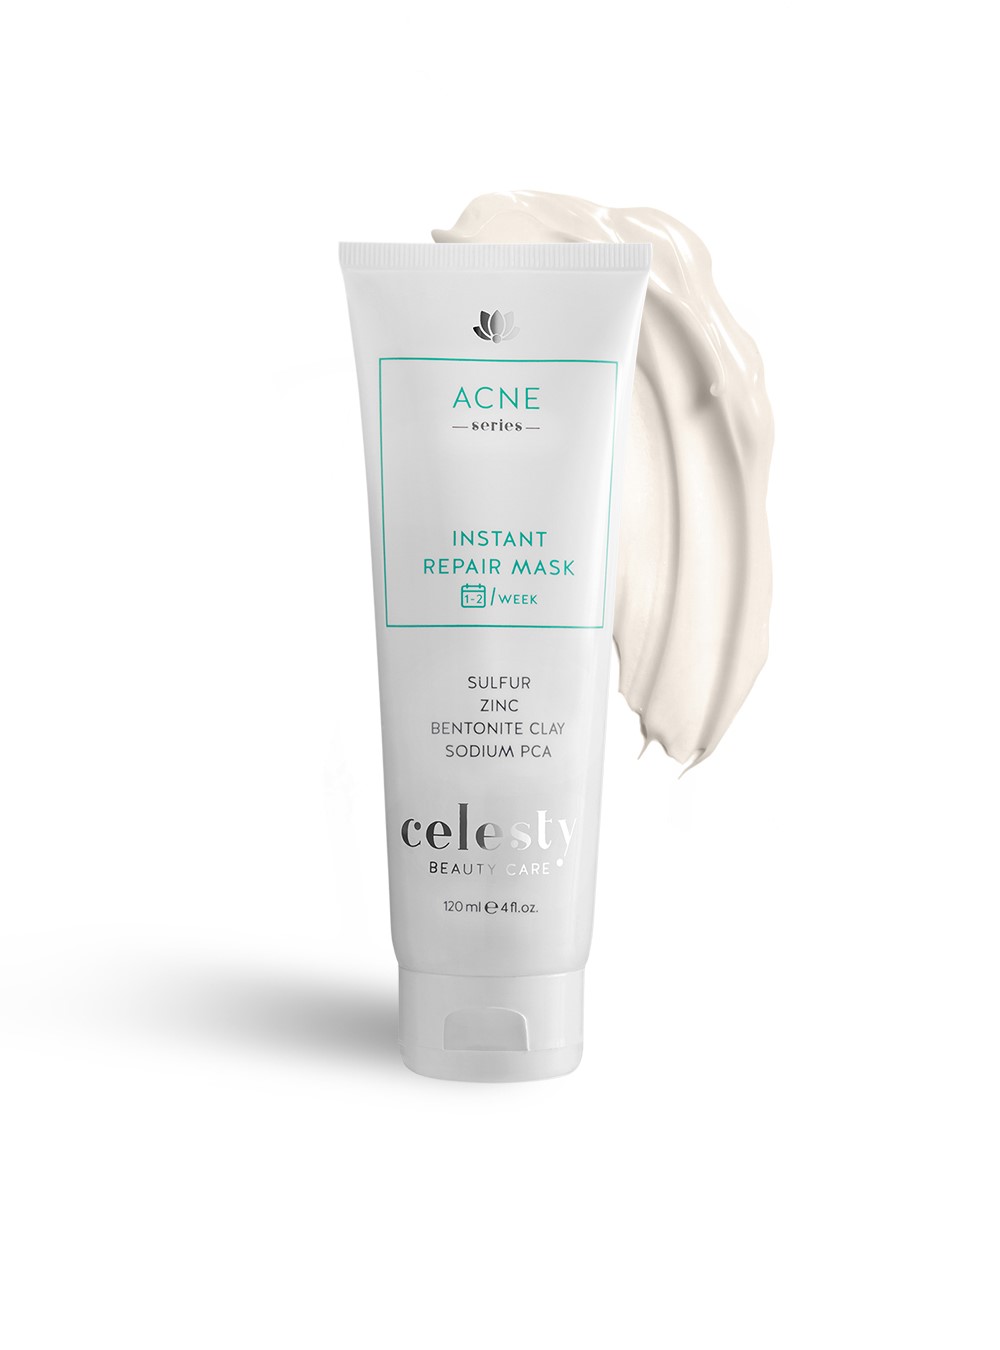 Acne Series Instant Repair Mask with sulfur, zinc, pca, bentonite clay, red wine and green tea extracts